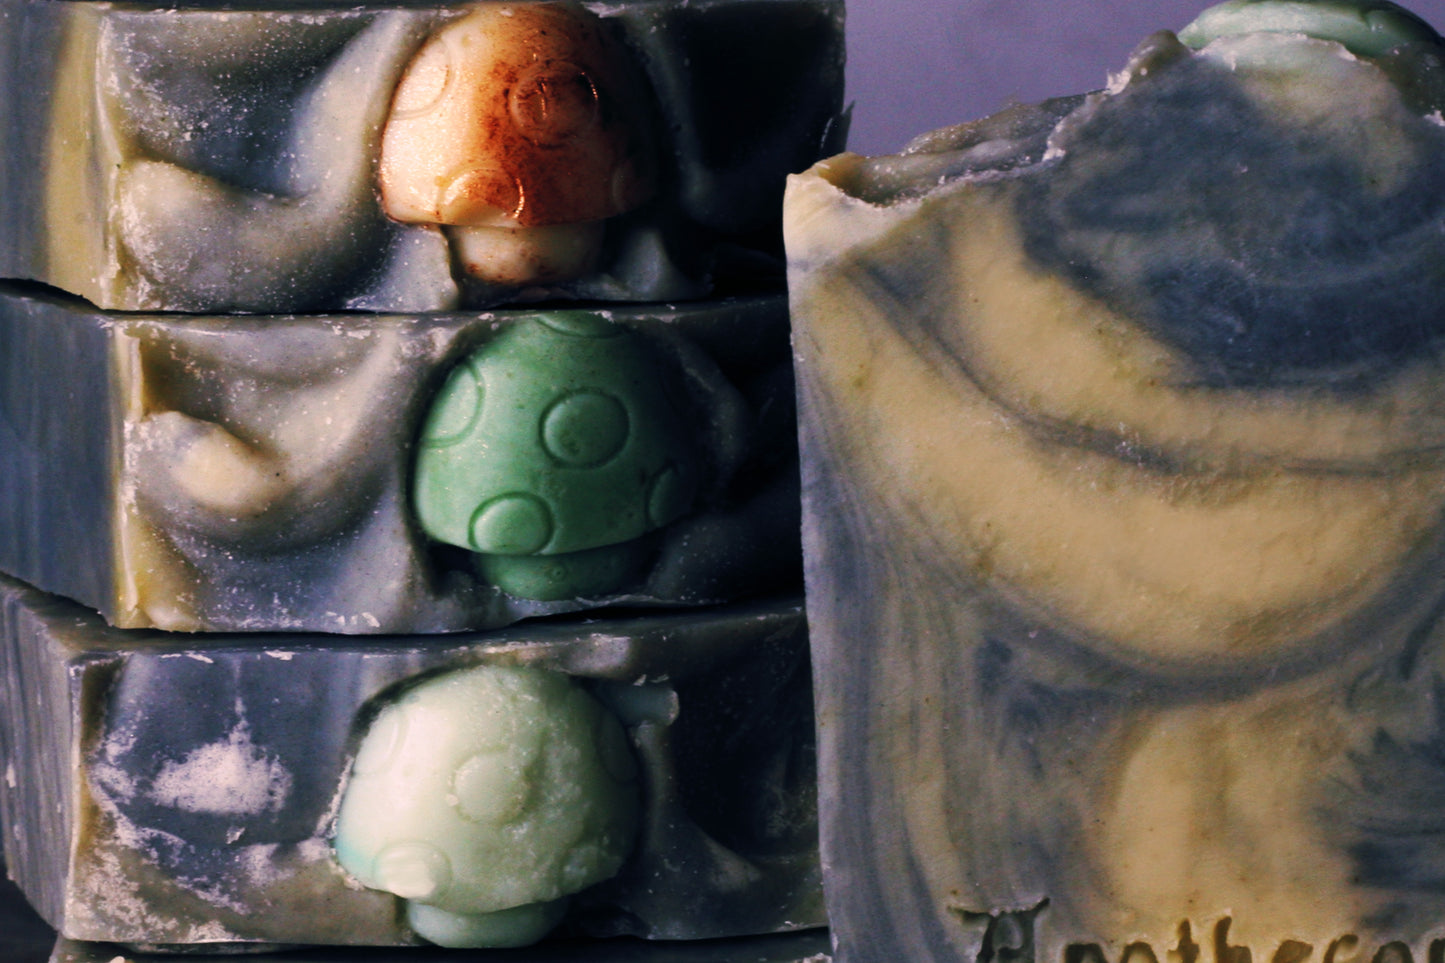 green and black handmade soap scented with patchouli and sandalwood, with mushroom embeds